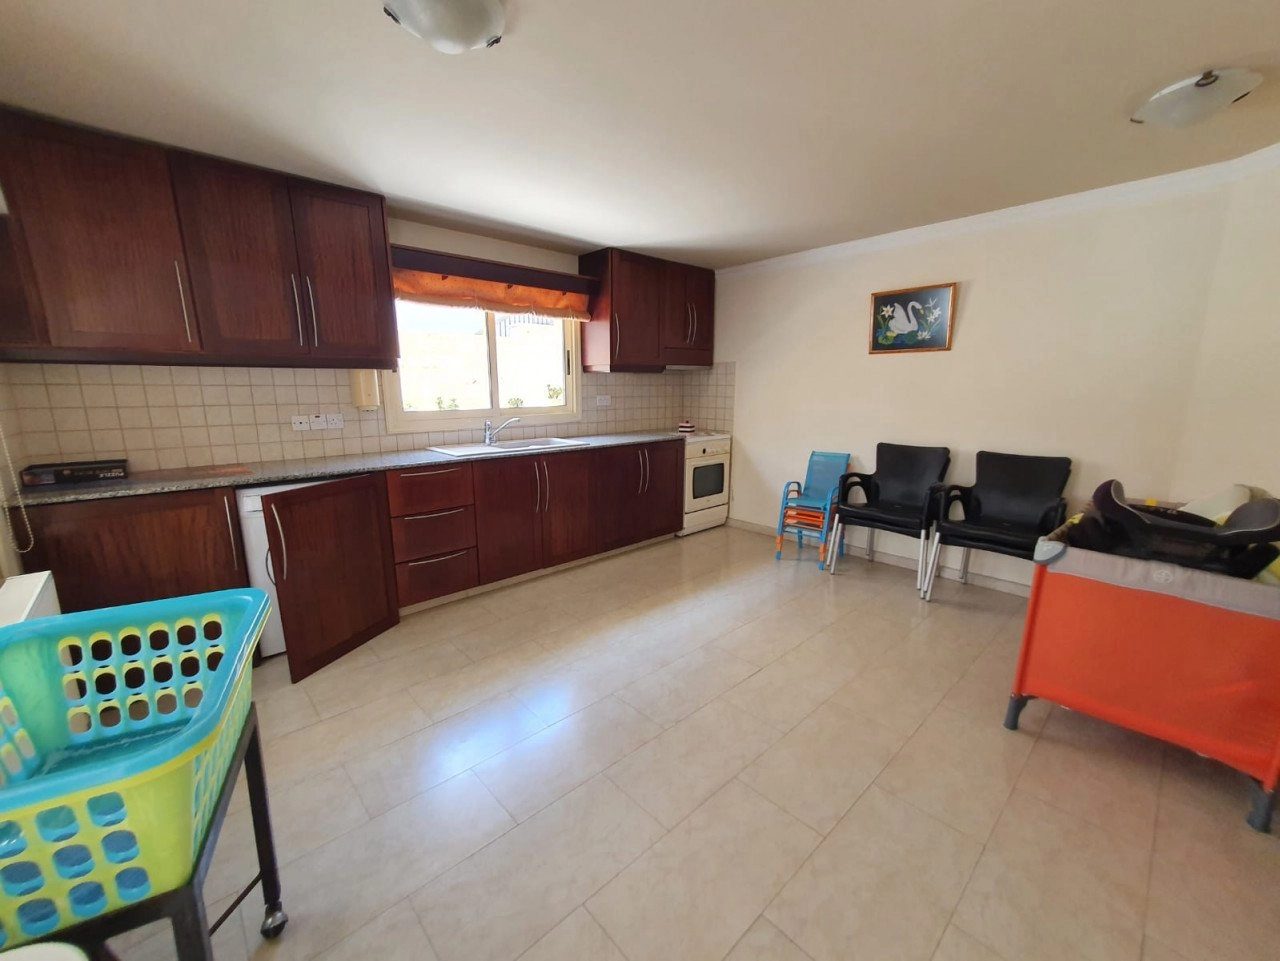 4 Bedroom House for Sale in Paphos – Emba